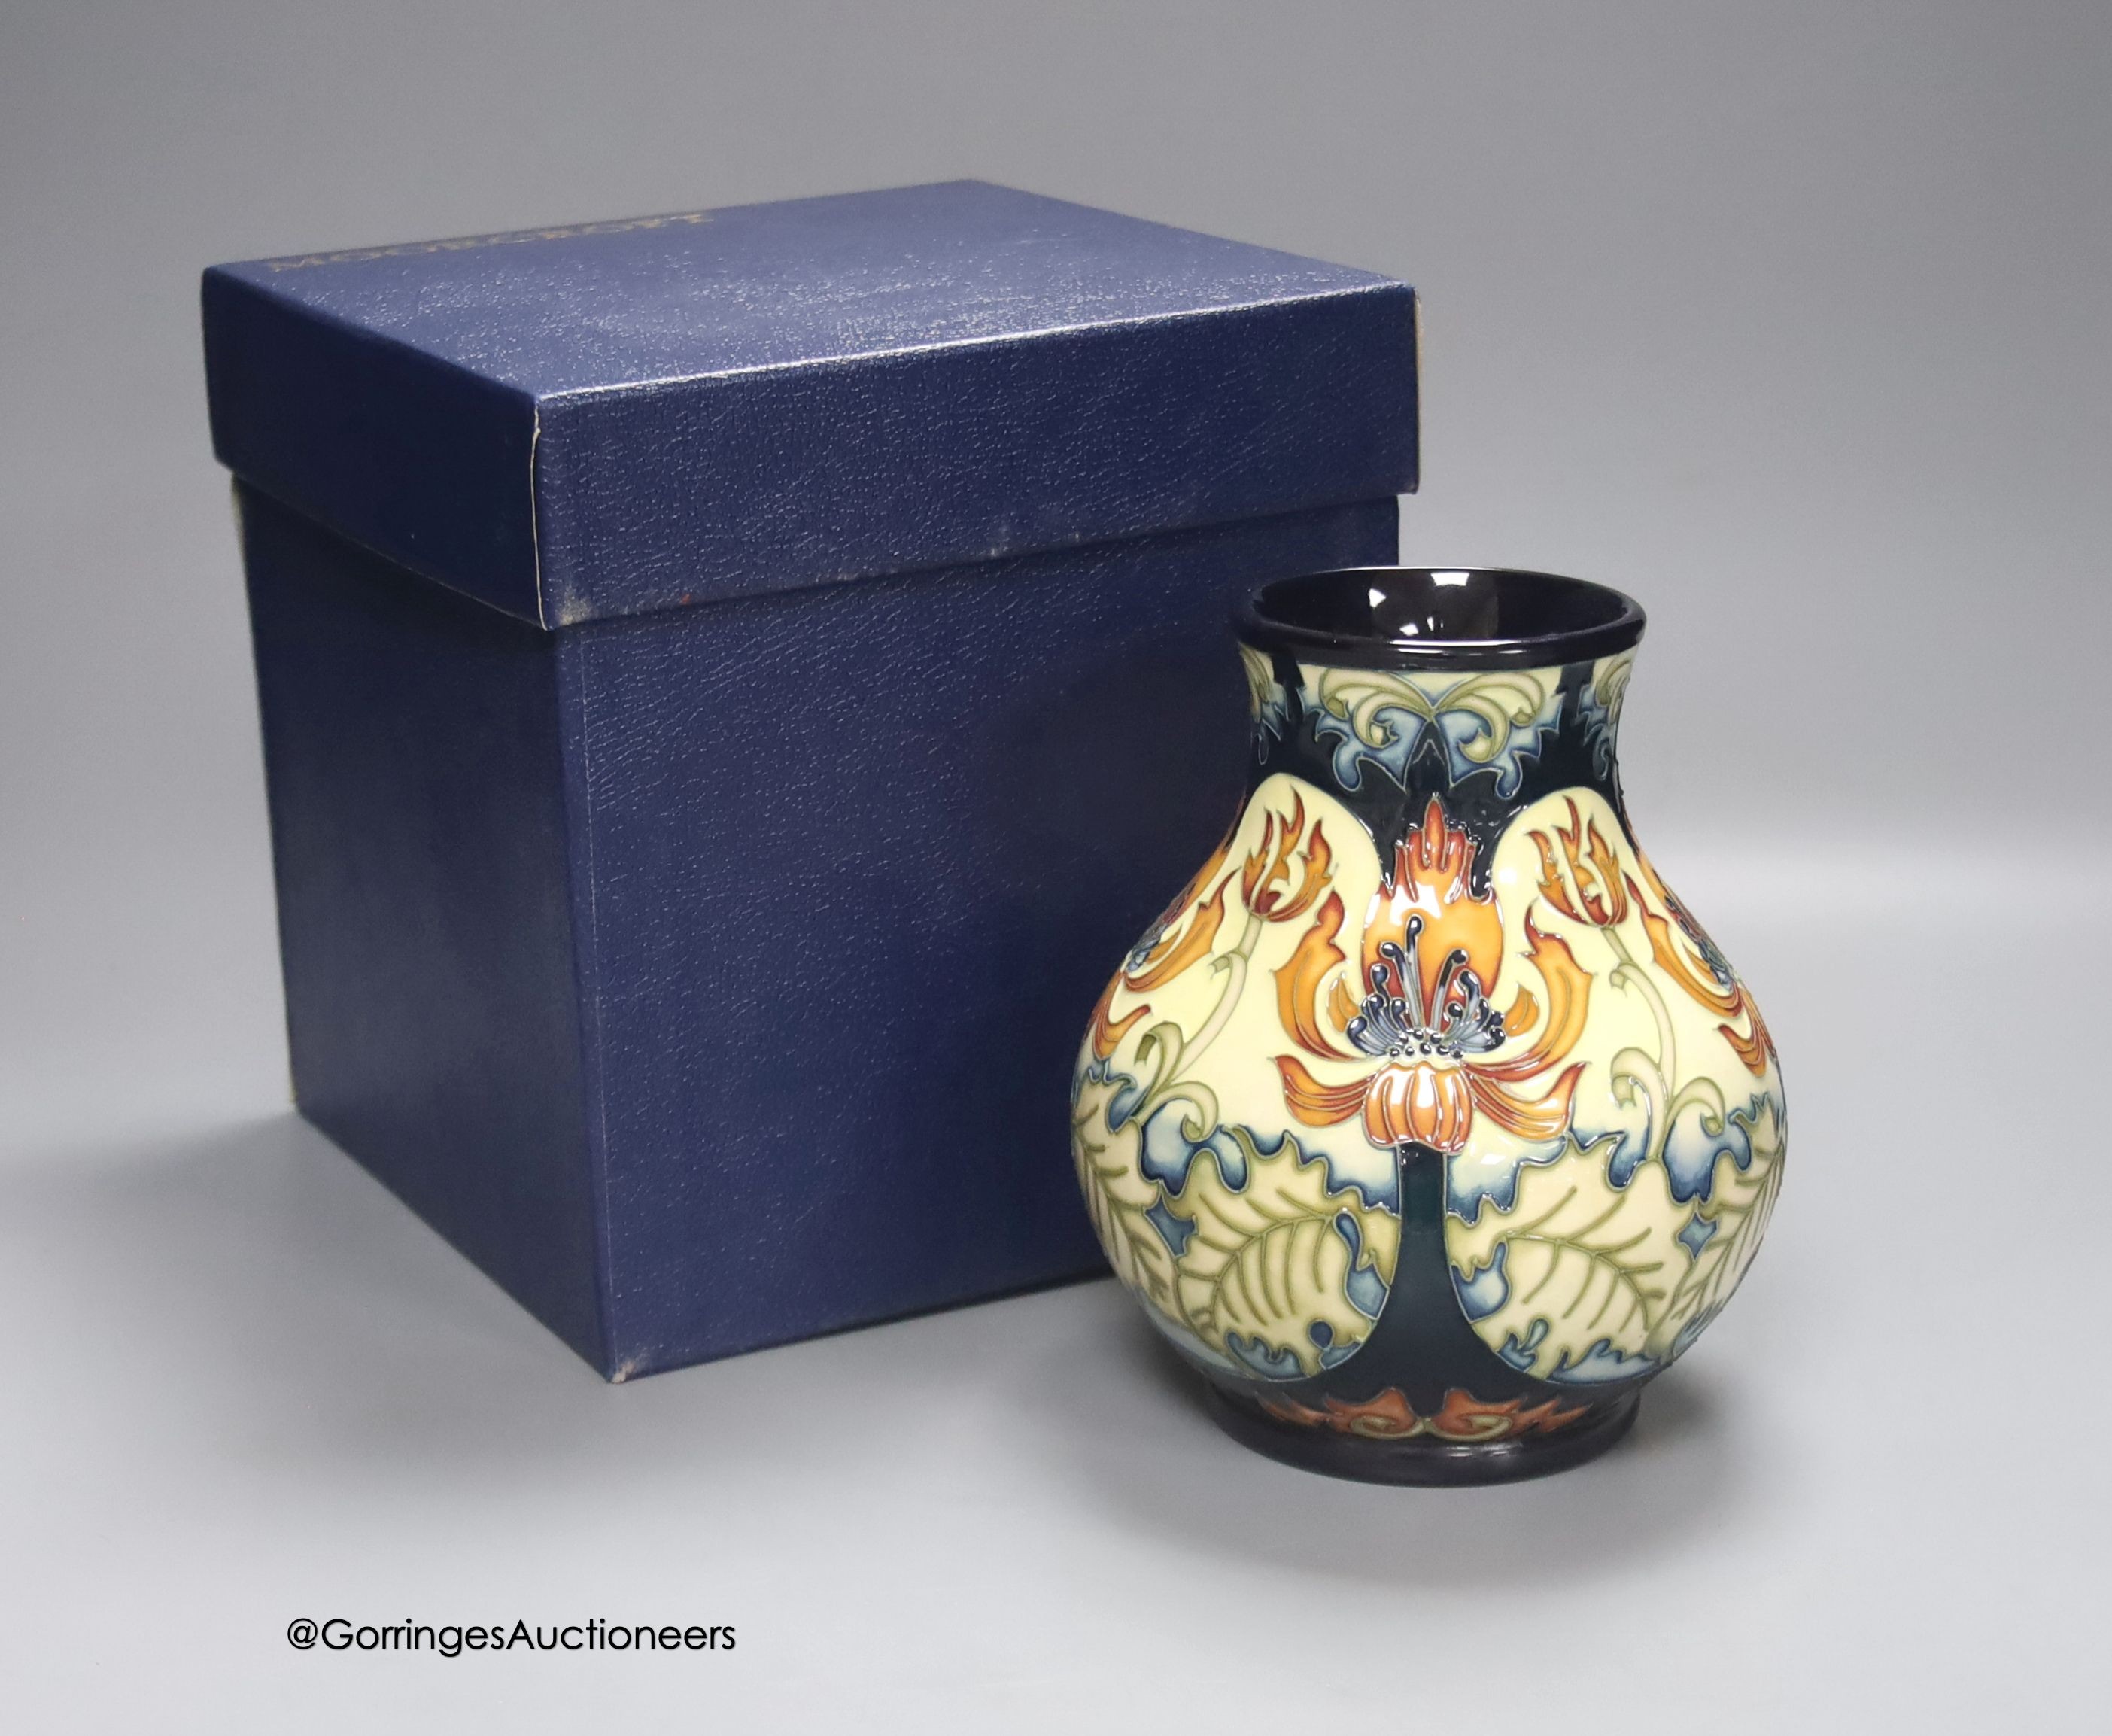 A boxed limited edition Moorcroft pottery vase in the Festive Flame pattern, designed by Kerry Goodwin, painted by Paul Hilditch, signed and numbered 7/100, height 16cm